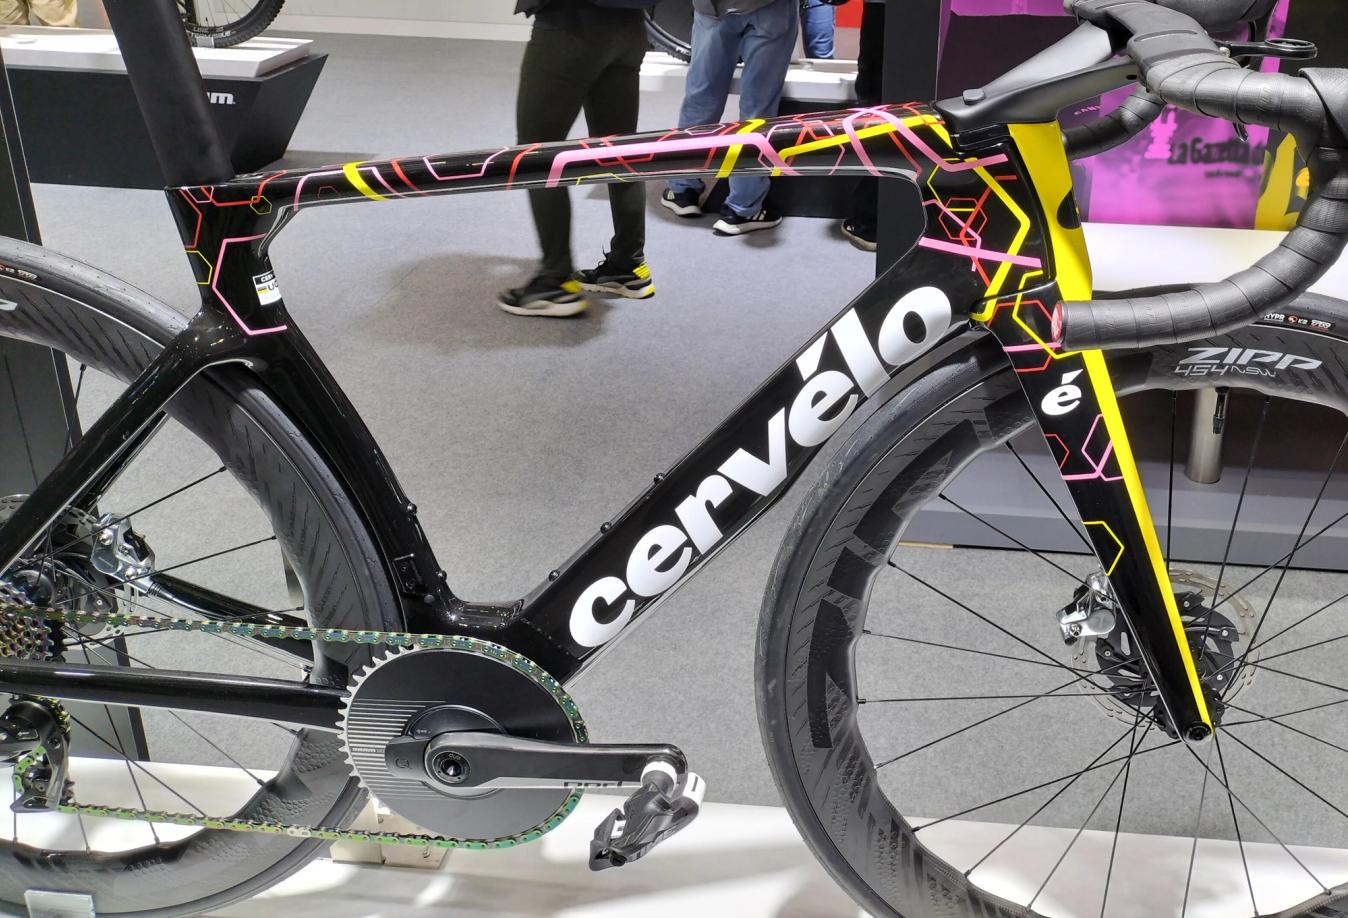 The team's success reached new heights in 2023 when they completed a clean sweep of Grand Tour victories. To celebrate this, Cervélo created a special colourway which provides a nod to this success, with the yellow, pink and red jerseys of the three Grand Tours all represented 